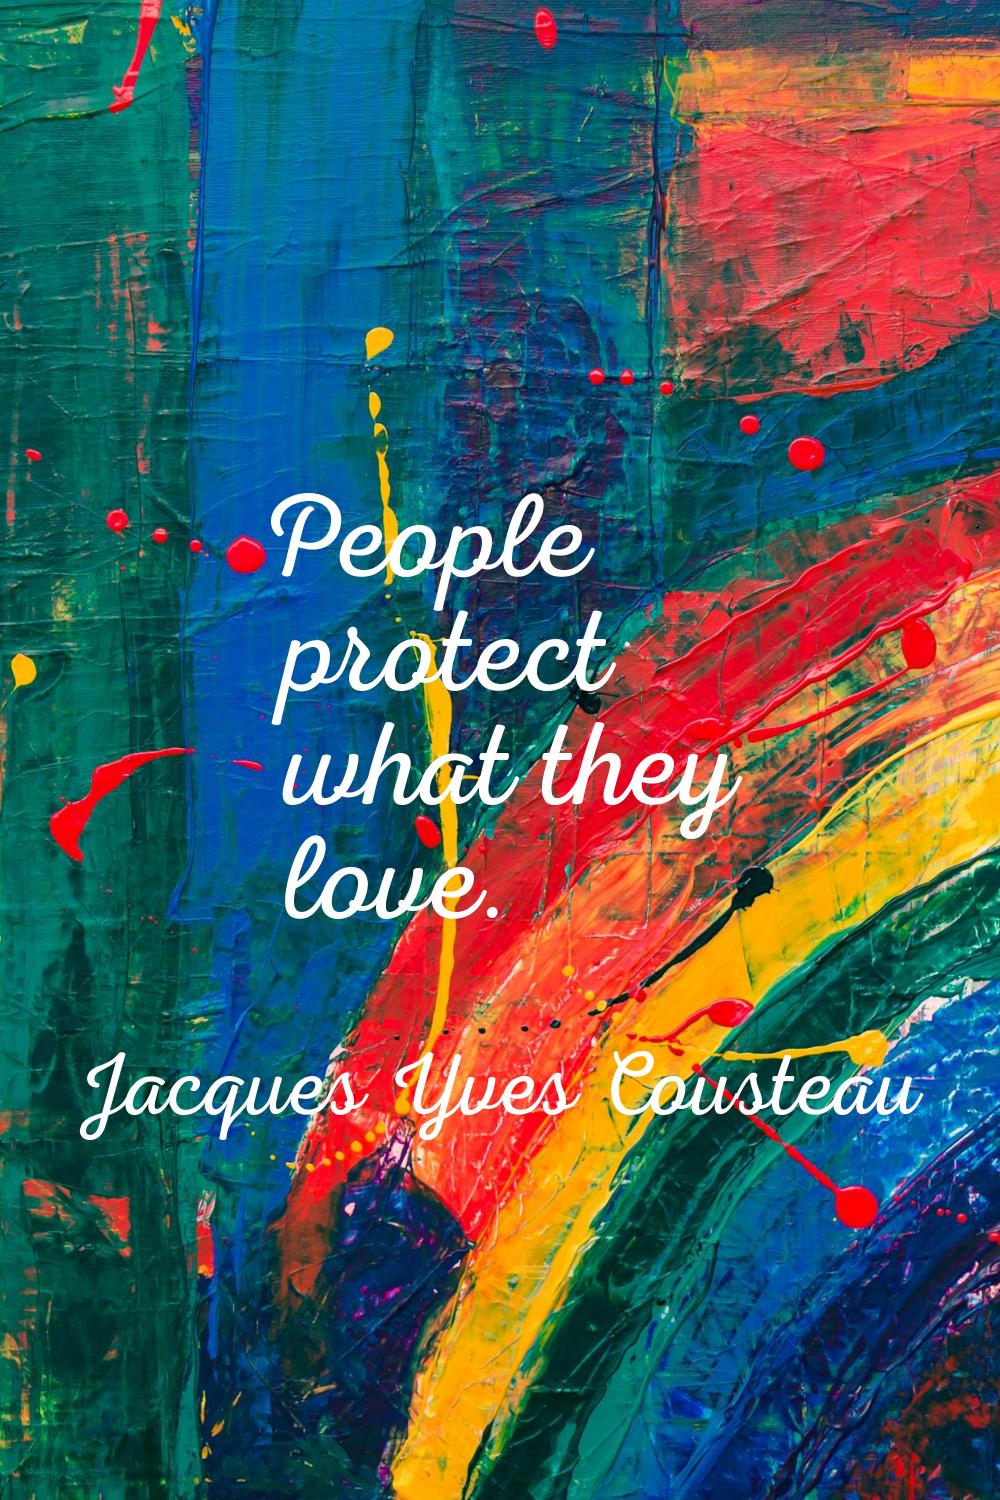 People protect what they love.